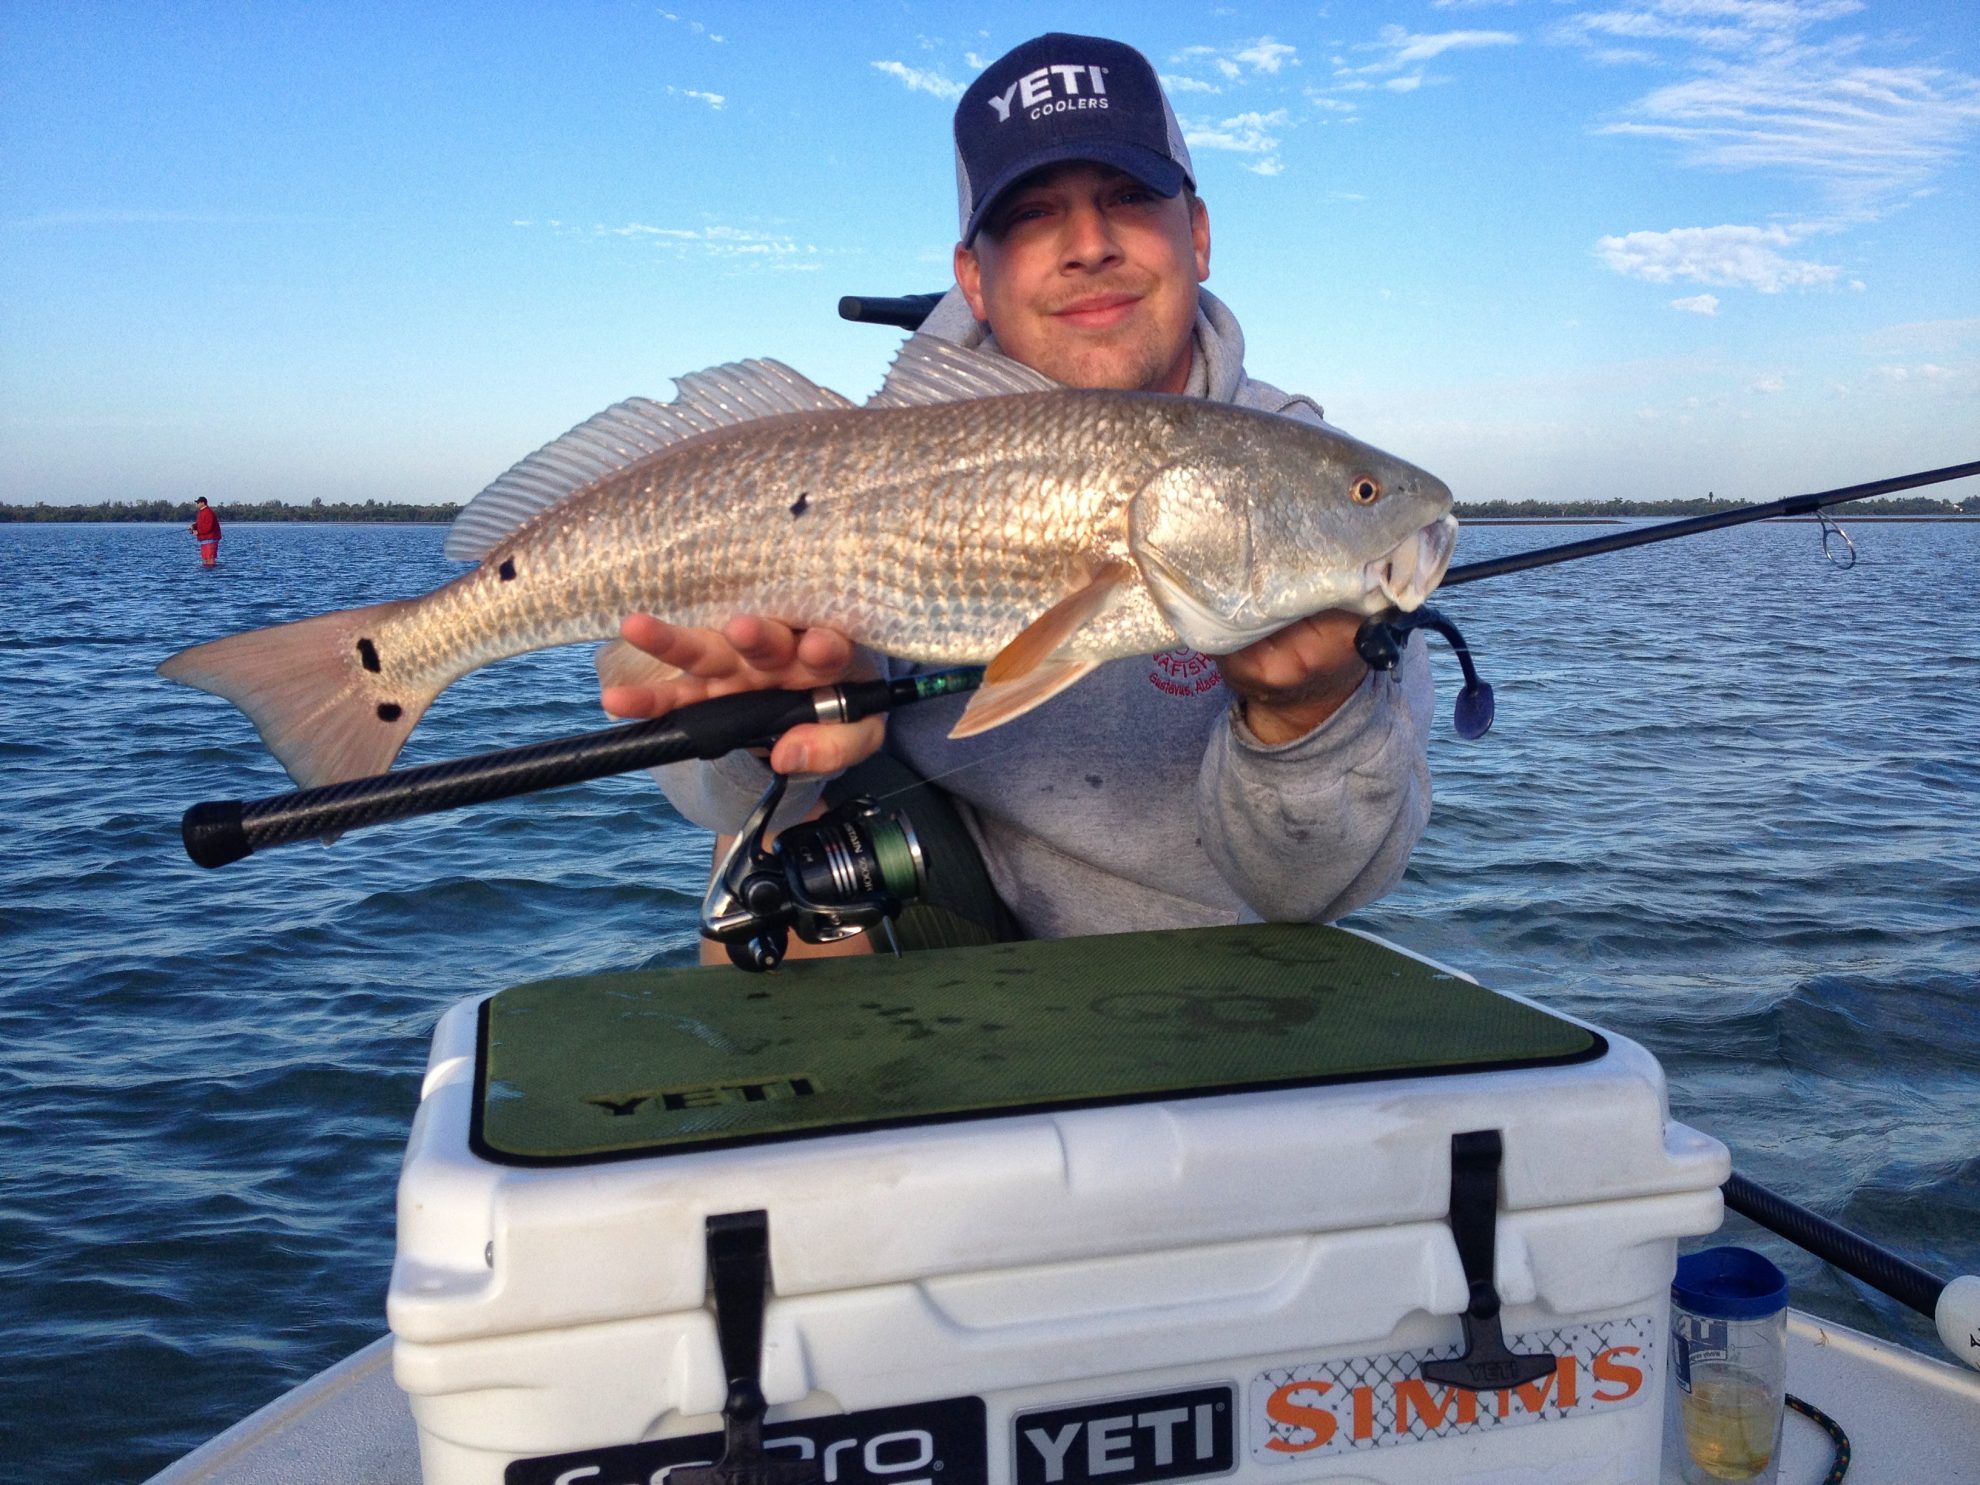 Gear Review: S1 Nano Sewell Custom Inshore Saltwater Spinning Rod